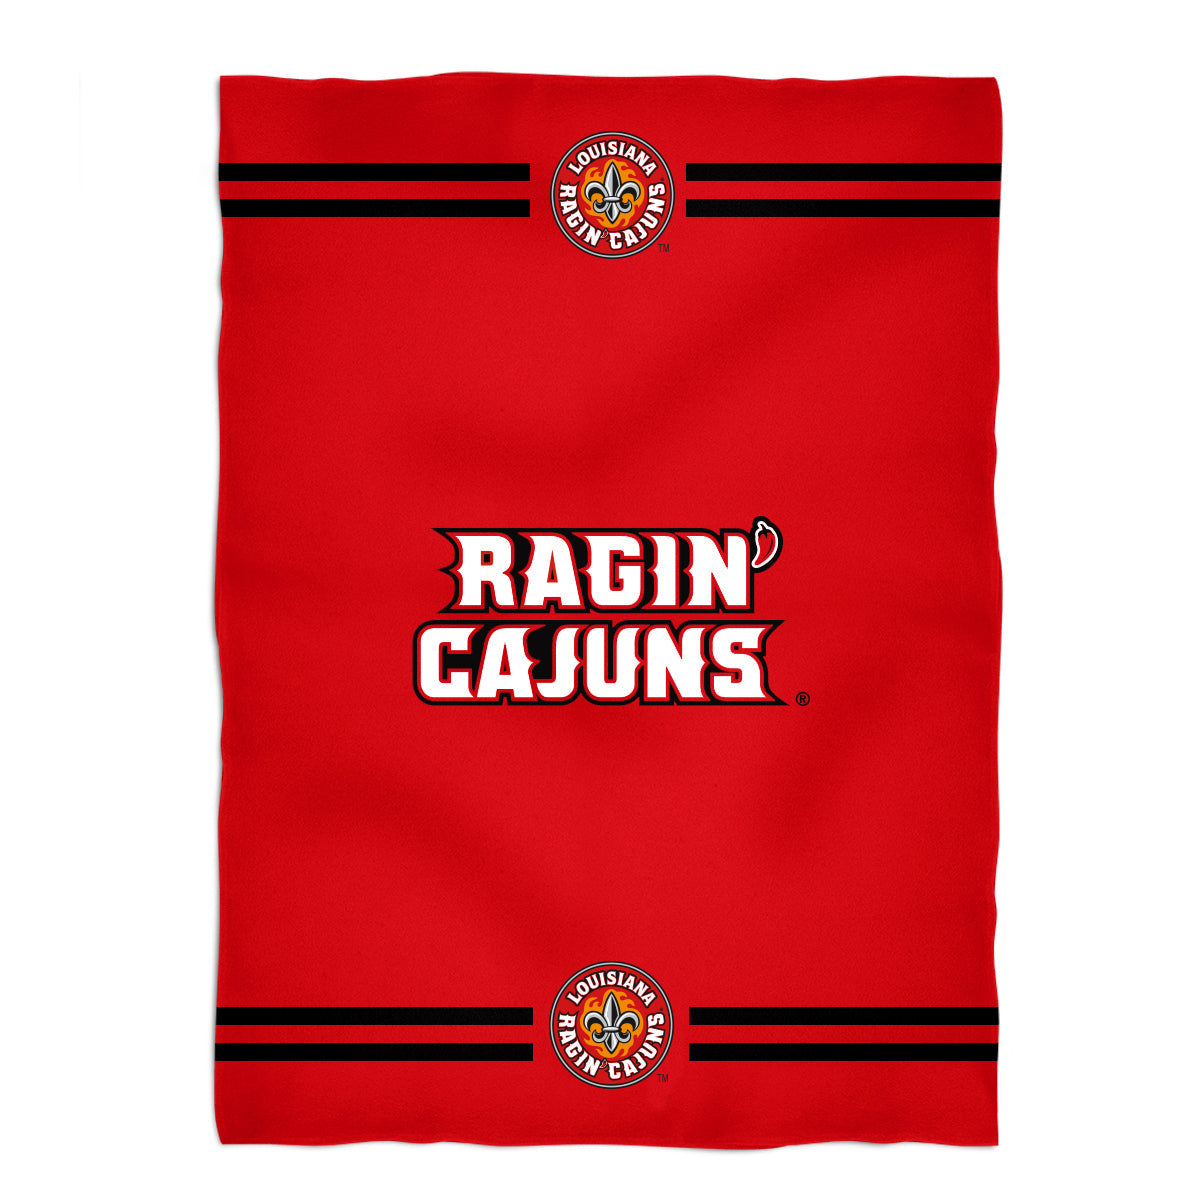 Louisiana at Lafayette Cajuns Game Day Soft Premium Fleece Red Throw Blanket 40 x 58 Logo and Stripes